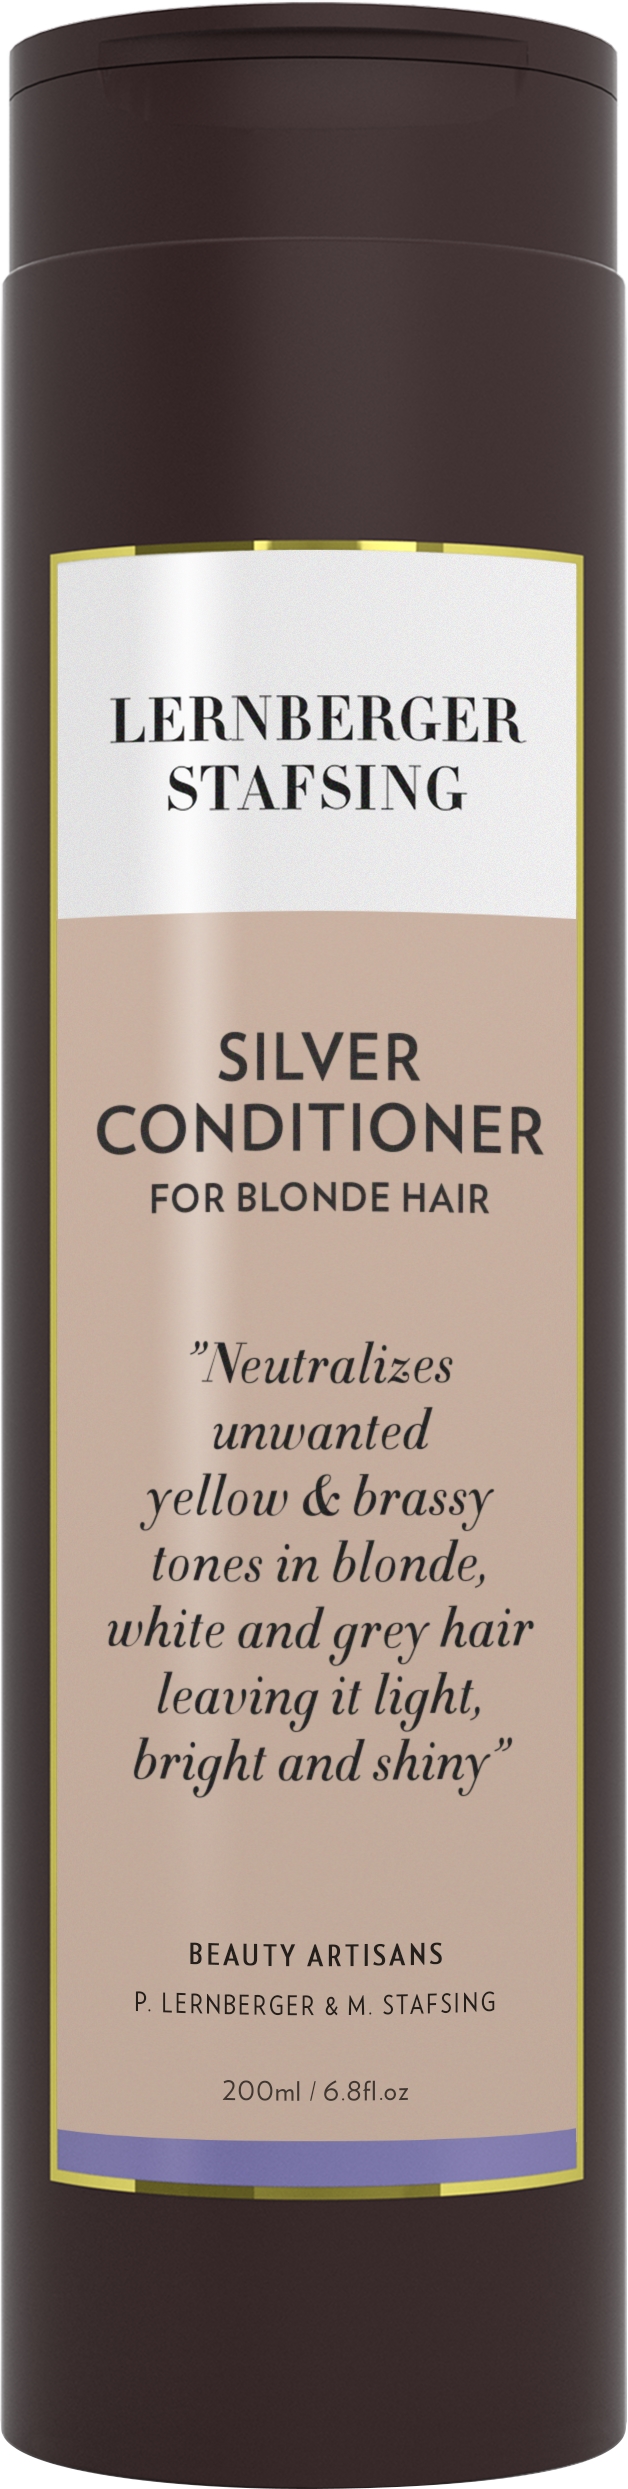 For Blonde Hair Silver Conditioner